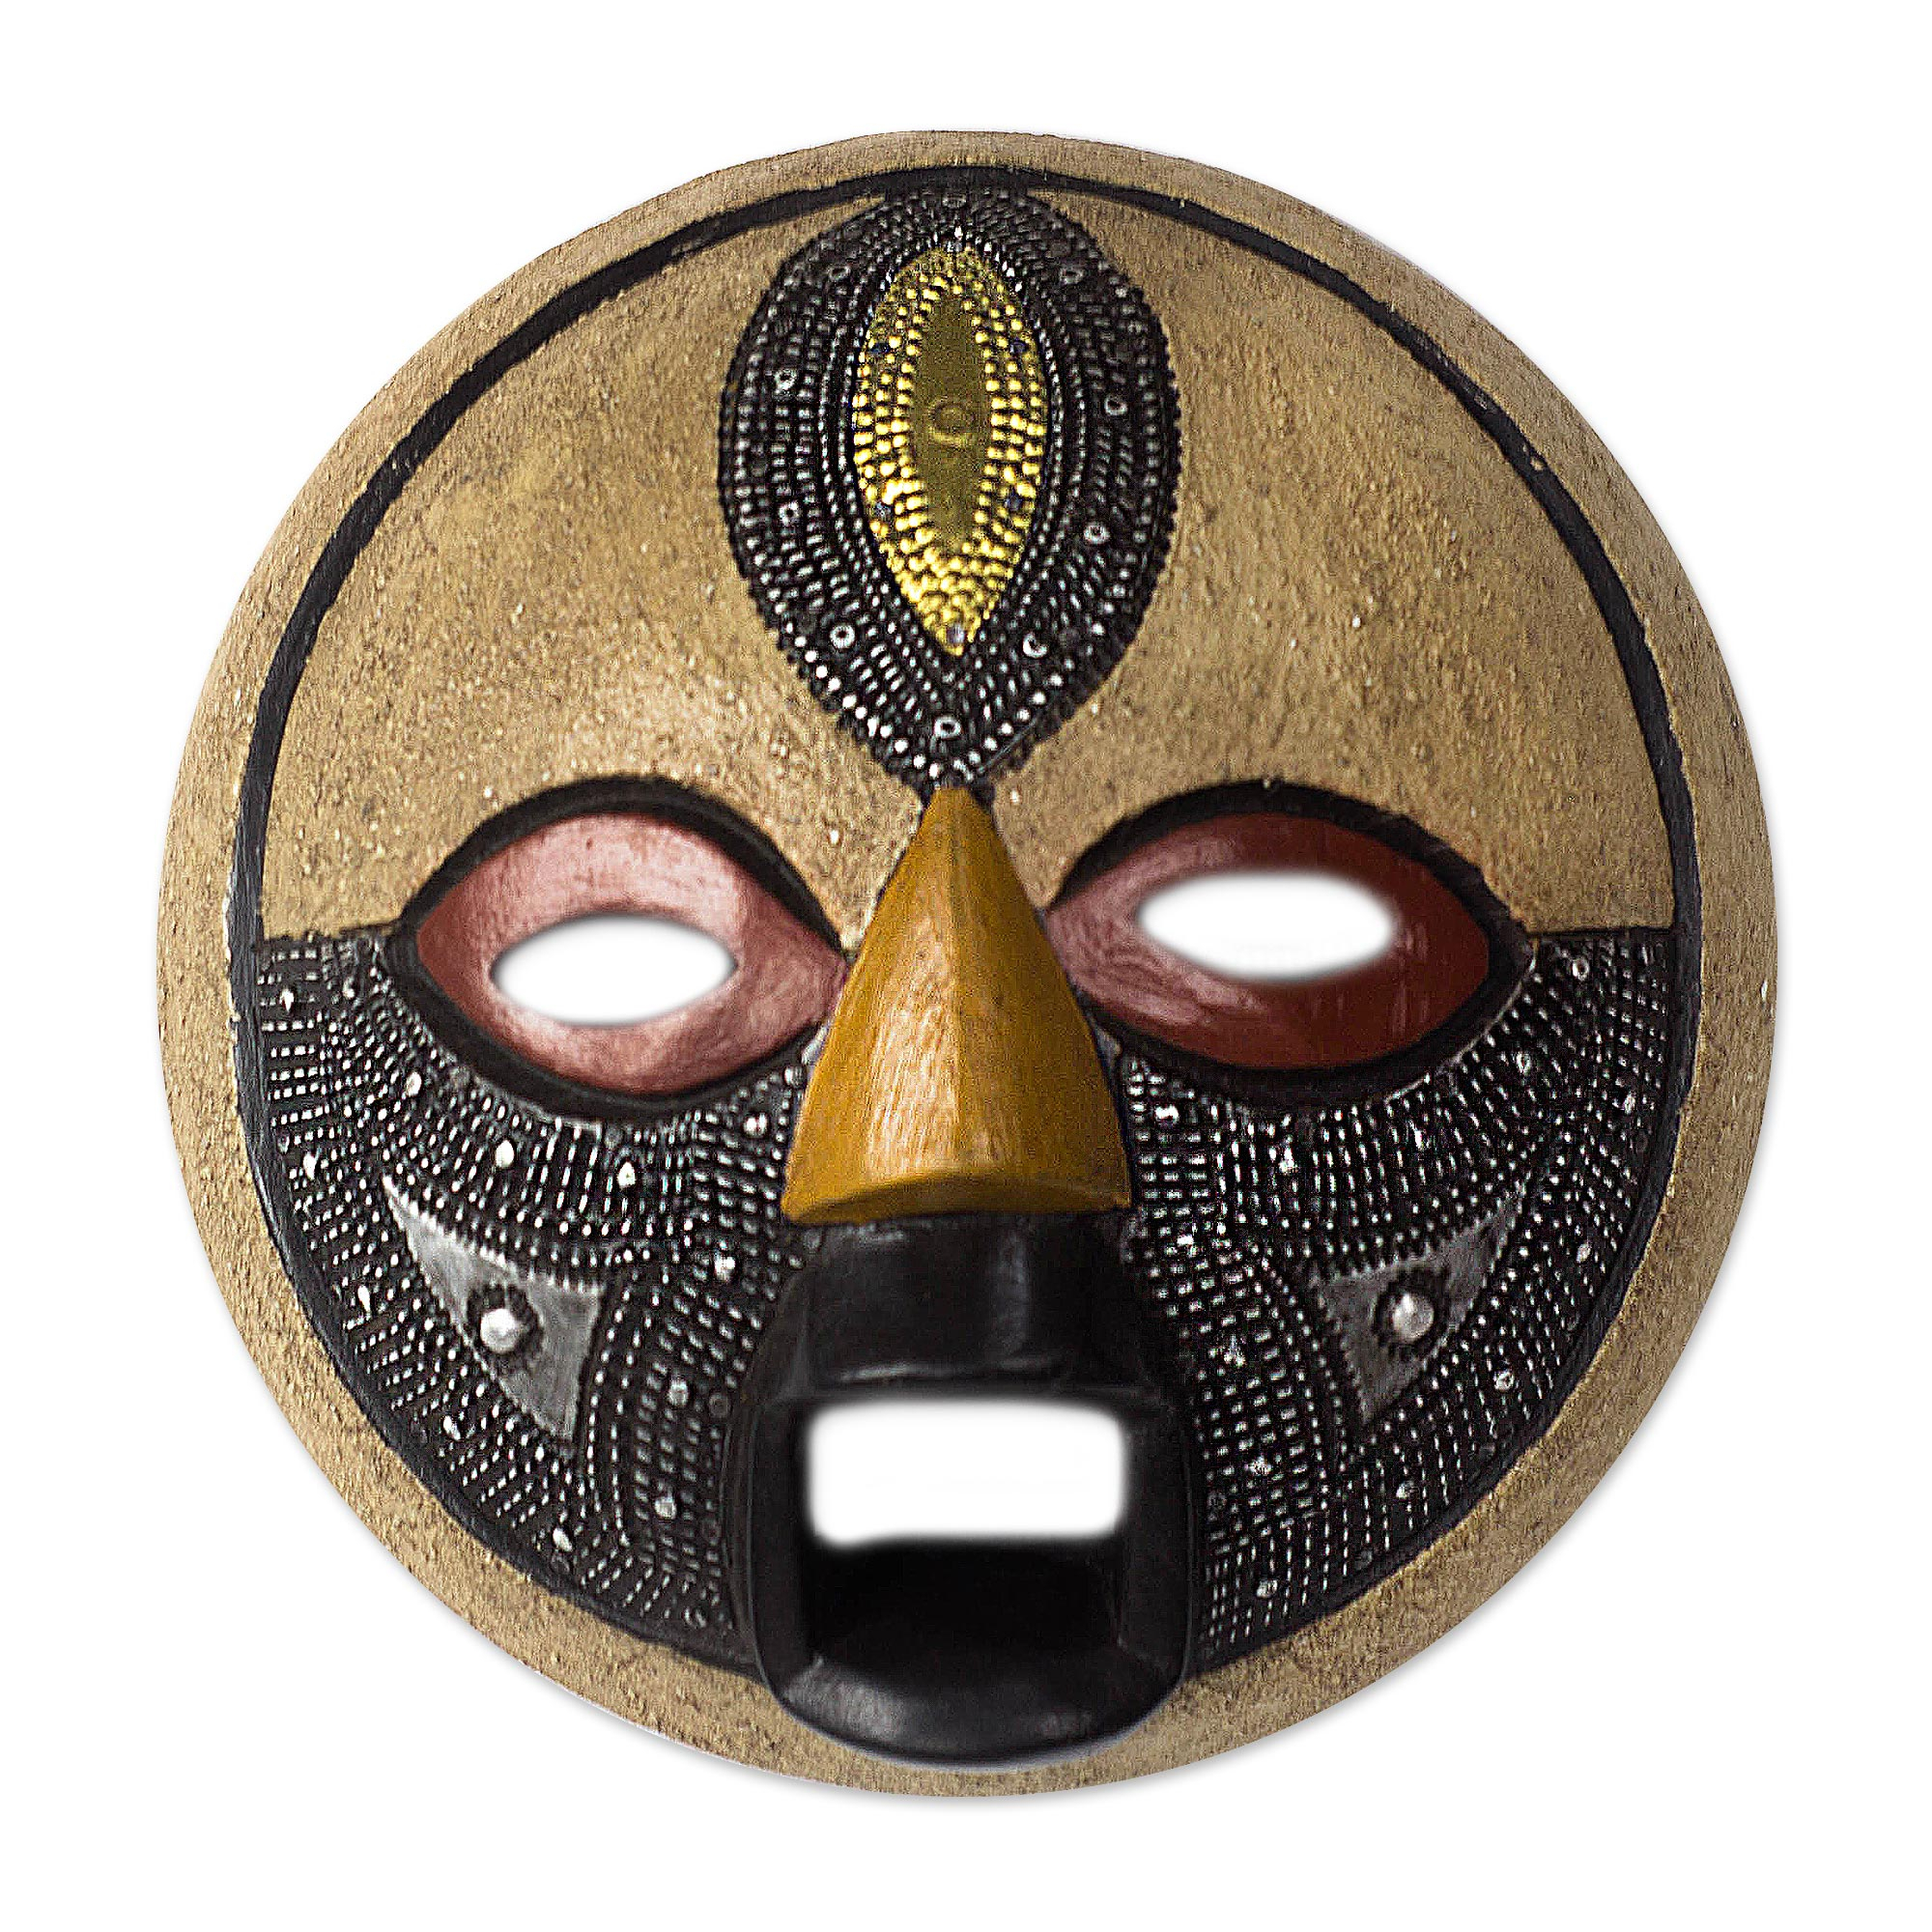 UNICEF Market | Round African Wood Mask with Brass and Aluminum Accents ...